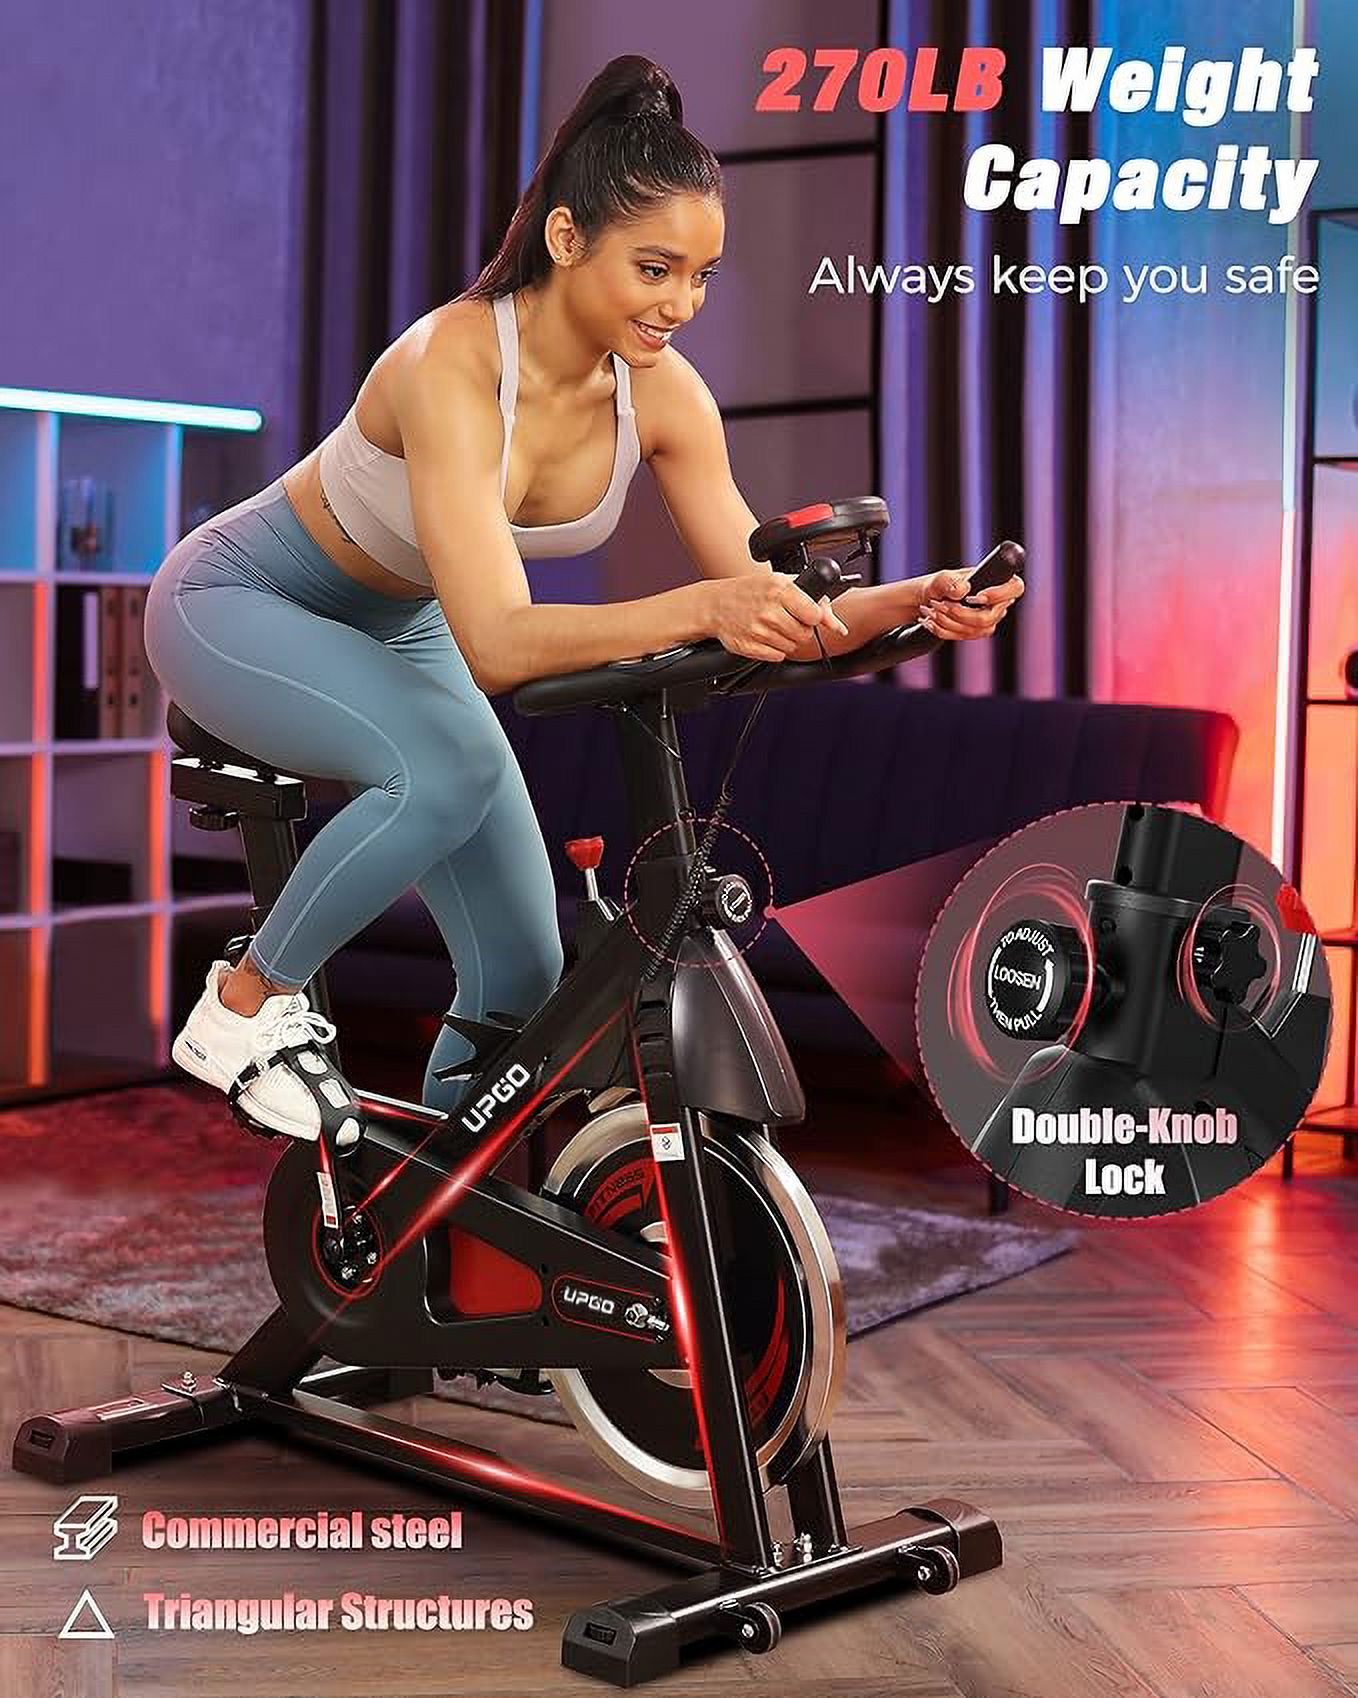 UPGO Exercise Bike-Stationary Indoor Cycling Bike for Home 270 Lbs Weight Capacity, Comfortable Seat Cushion and iPad Holder Red - image 5 of 7